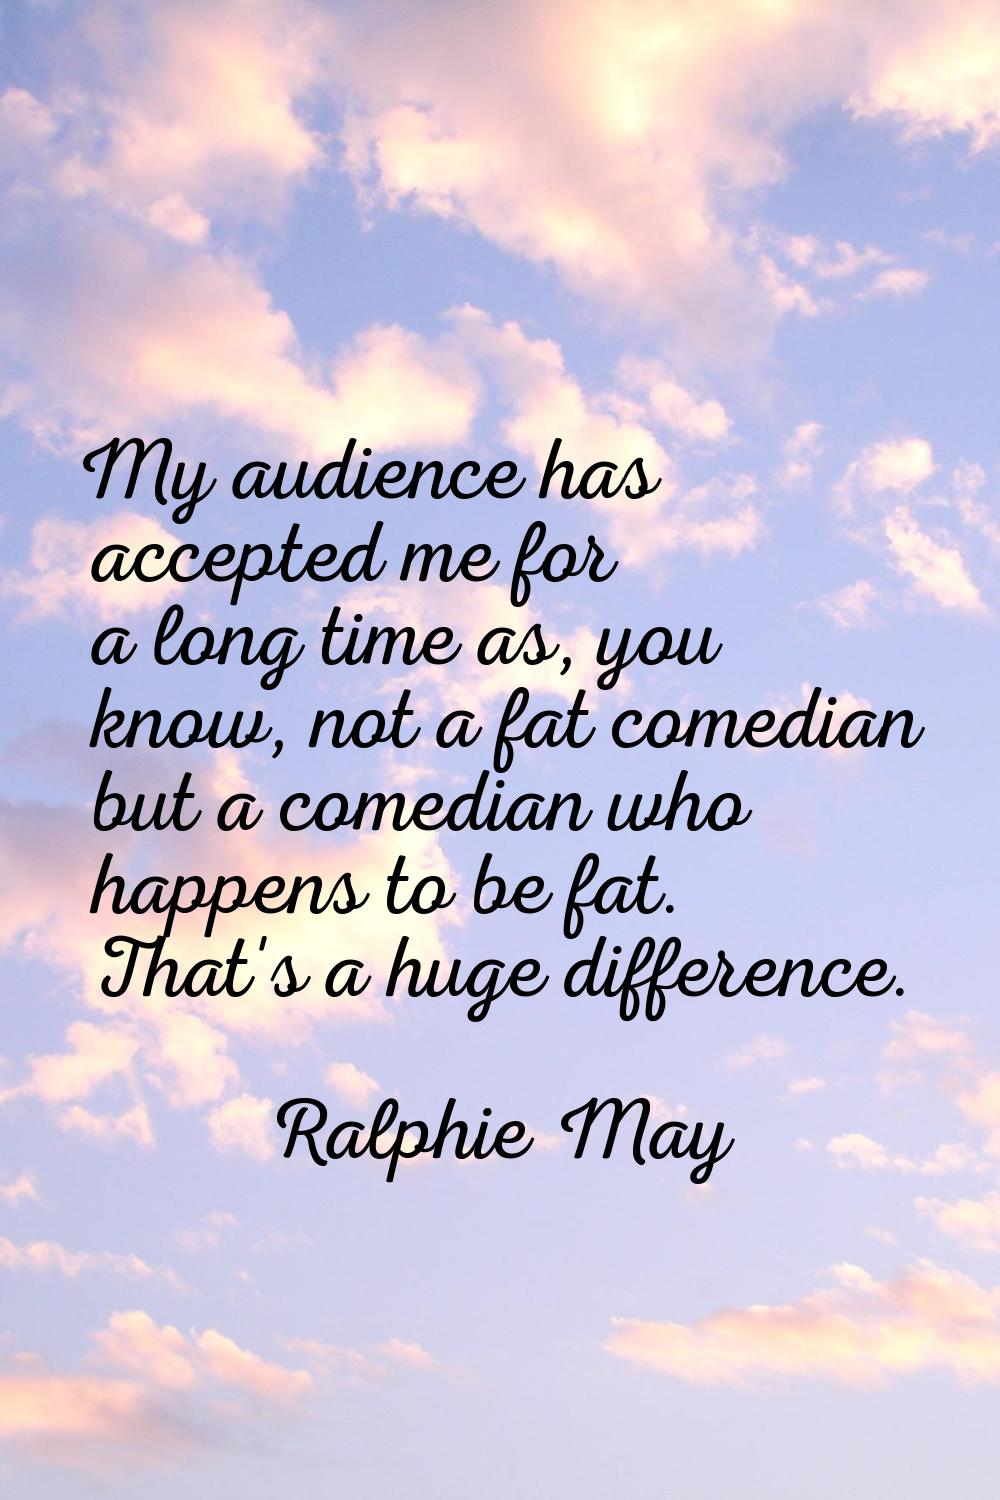 My audience has accepted me for a long time as, you know, not a fat comedian but a comedian who hap